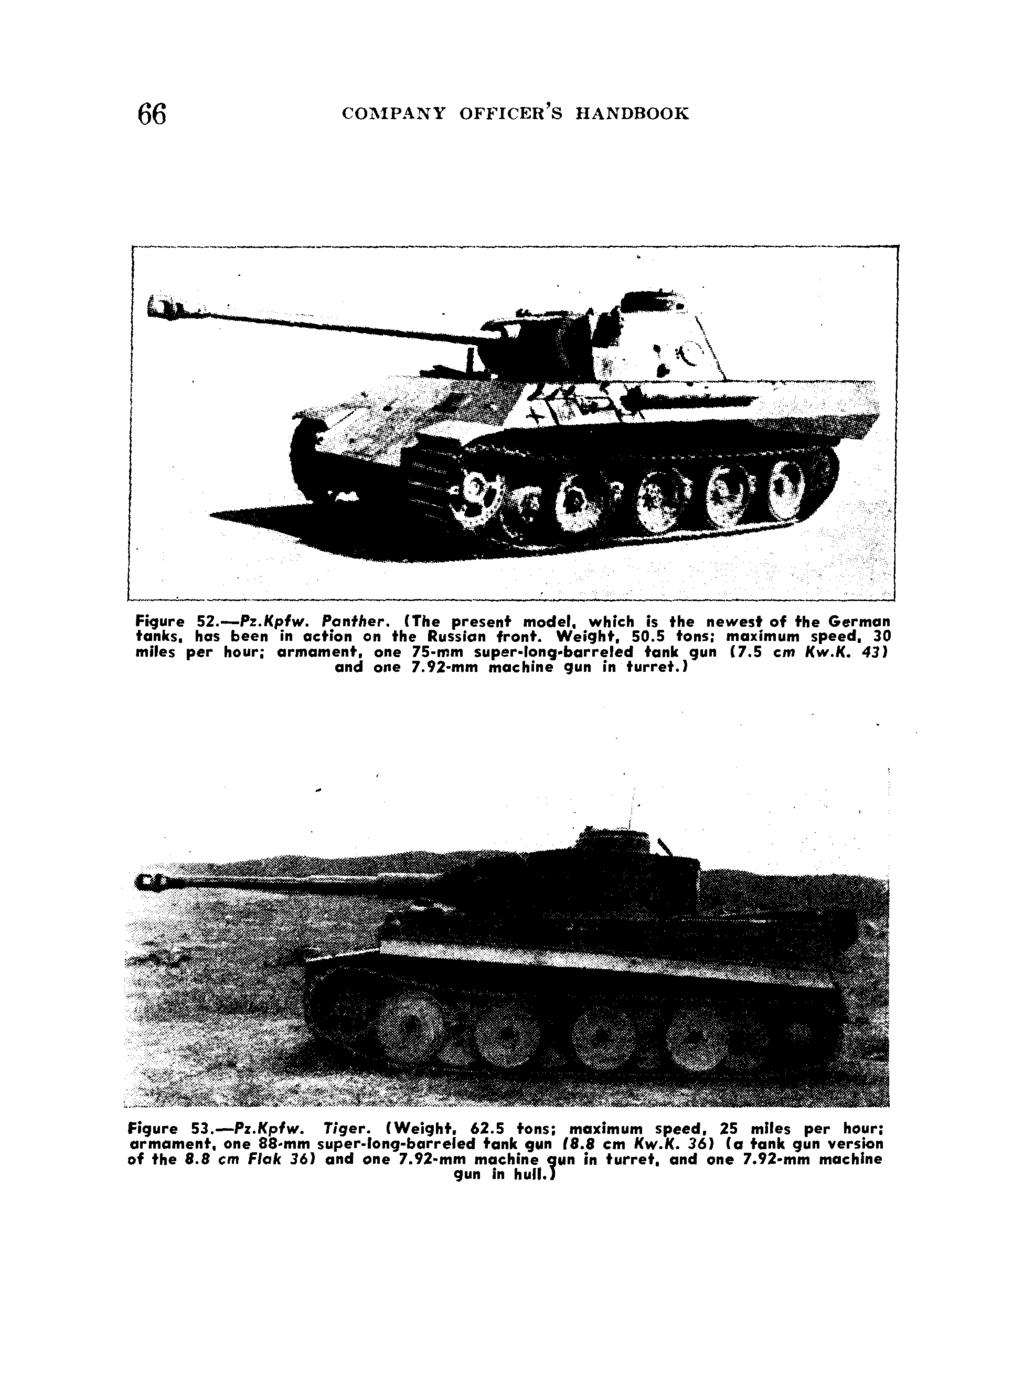 66 COMIPANY OFFICER'S HANDBOOK L Figure 52.-Pz.Kpfw. Panther. (The present model, which is the newest of the German tanks, has been in action on the Russian front. Weight, 50.5 tons; maximum speed.